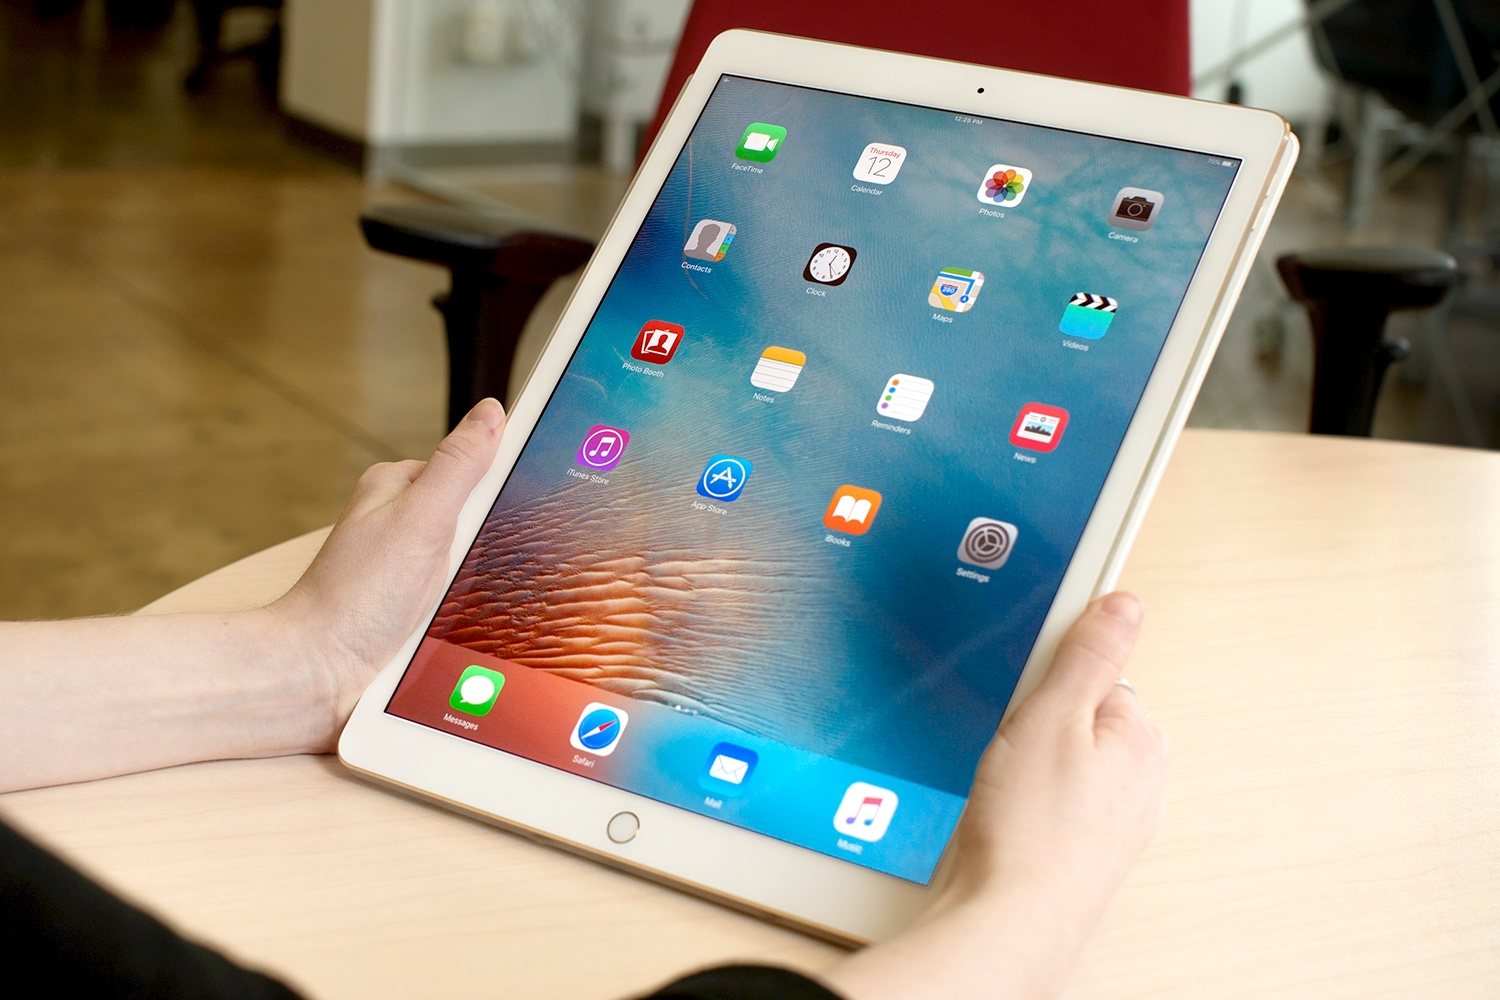 Apple iPad Pro 9.7-inch review blog: The near perfect tablet